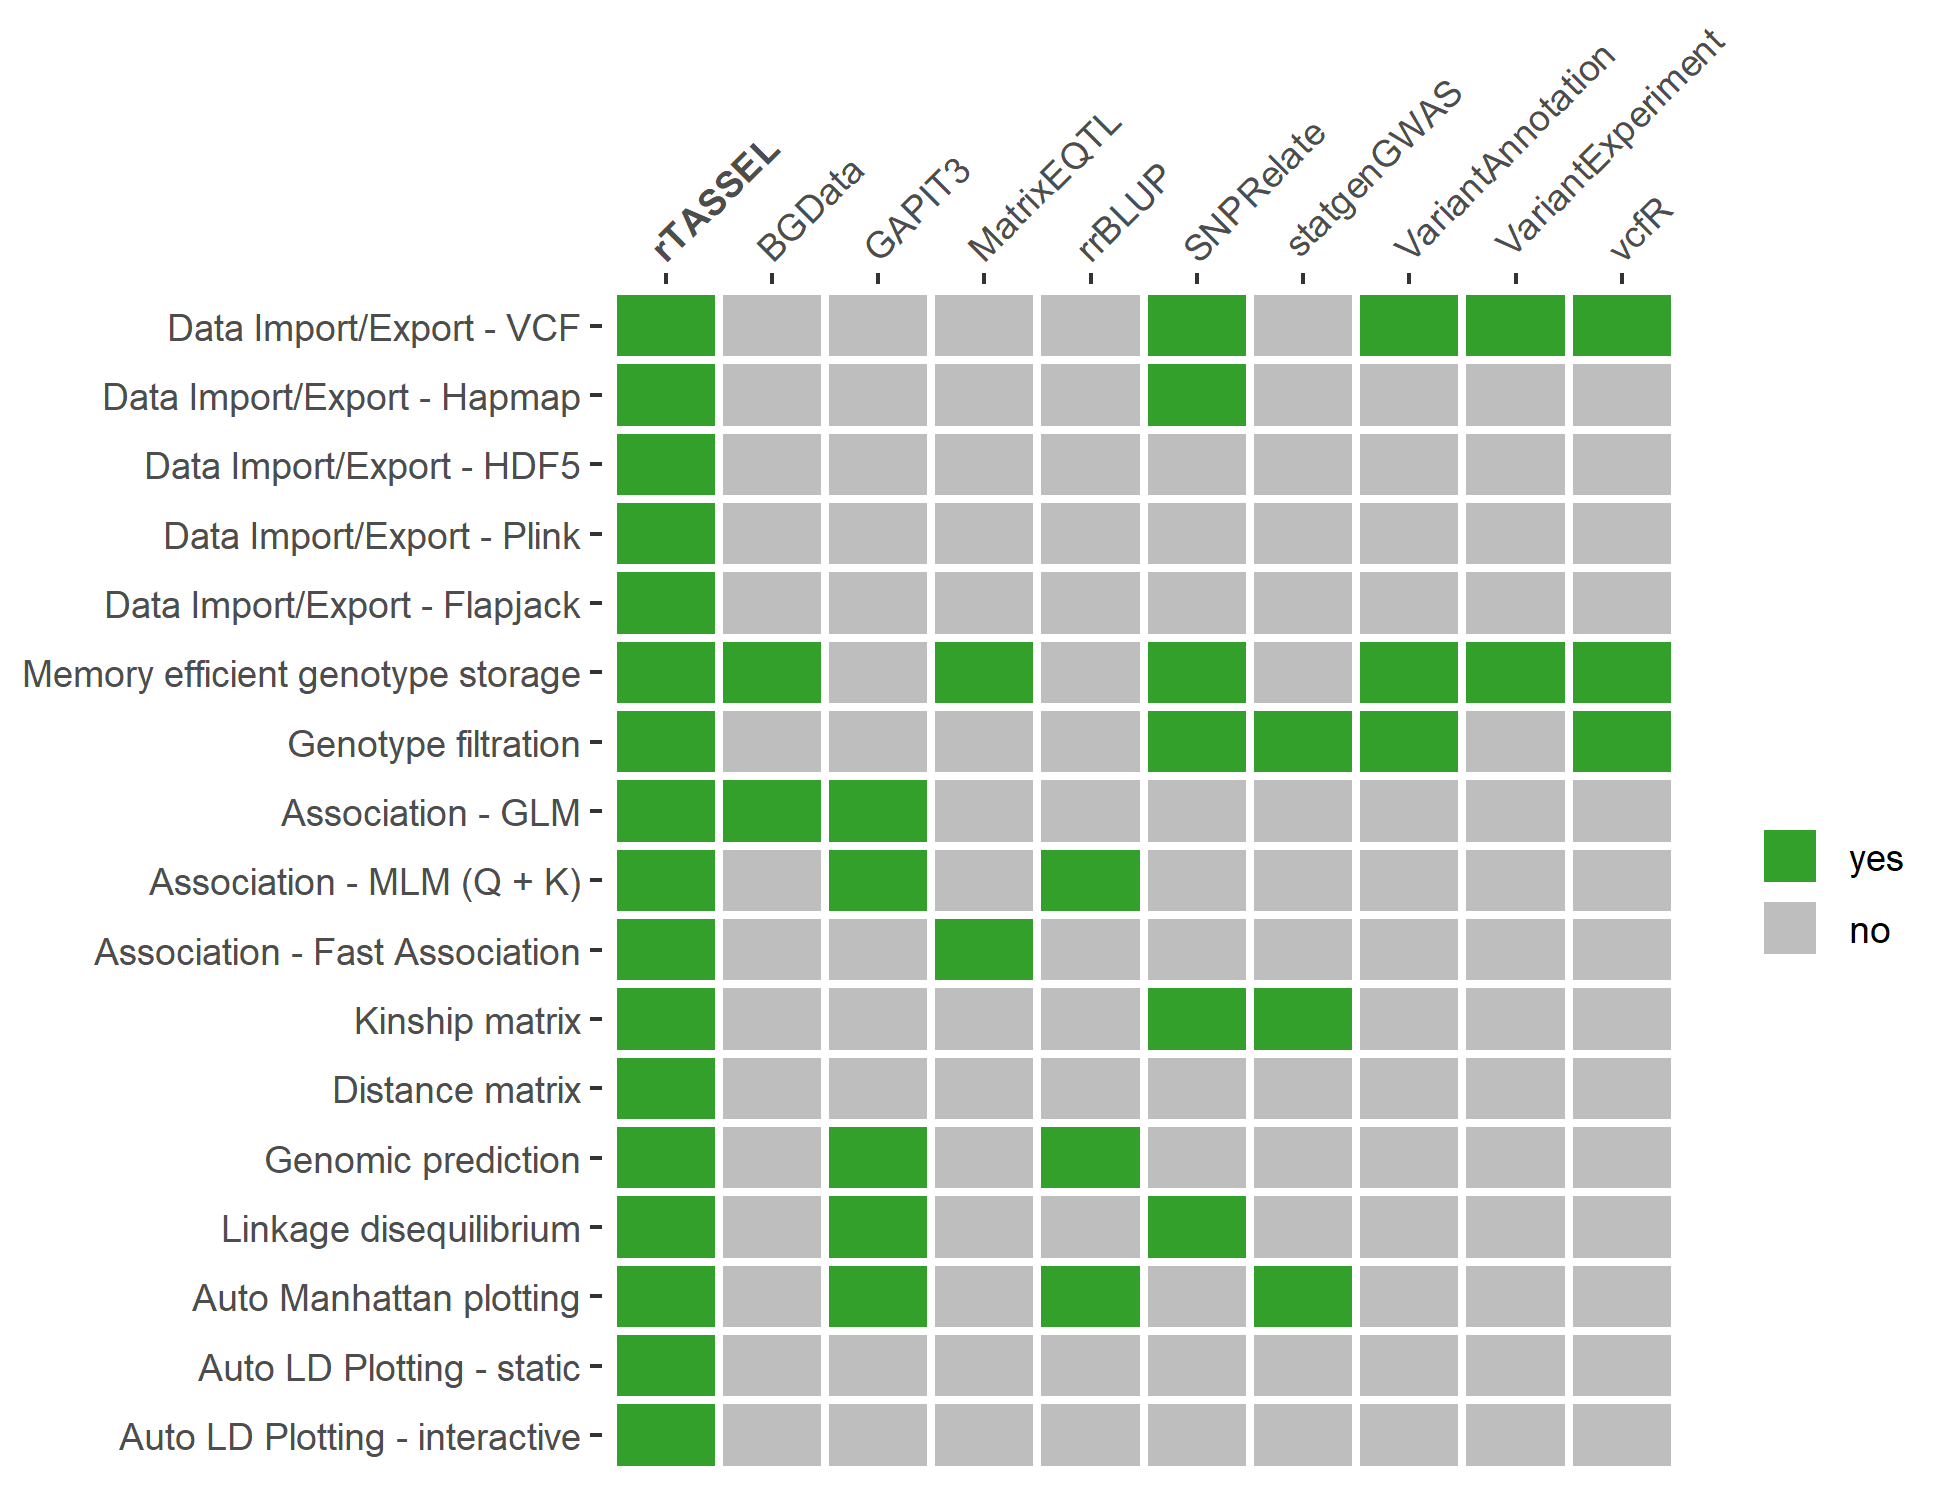 Feature comparisons of rTASSEL with other R packages. Features of rTASSEL (y-axis) are compared with other commonly-used R packages (x-axis). Packages that contain a specified feature are highlighted green (yes) and grey (no) if they do not contain a feature or are limited in scope. Association features for packages are based on if said package contains methods for generalized linear models, mixed linear models utilizing the “Q+K” method (Yu et al., 2006), or multi trait fast association methods (Shabalin, 2012). Kinship and distance matrix features denote if a package can return an n x n matrix of values for further use. Packages that contain plotting features indicate if the package contains an automated plot feature instead of using base or grid-based R graphics (R Core Team, 2020) in conjunction with data output. The packages used for this comparison are BGData (Grueneberg and Campos, 2019), GAPIT3 (Wang and Zhang, 2020), MatrixEQTL (Shabalin, 2012), rrBLUP (Endelman, 2011), SNPRelate (Zheng et al., 2012), statgenGWAS (Rossum and Kruijer, 2020), VariantAnnotation (Obenchain et al., 2014), VariantExperiment (Liu et al., 2020), and vcfR (Knaus and Grünwald, 2017).